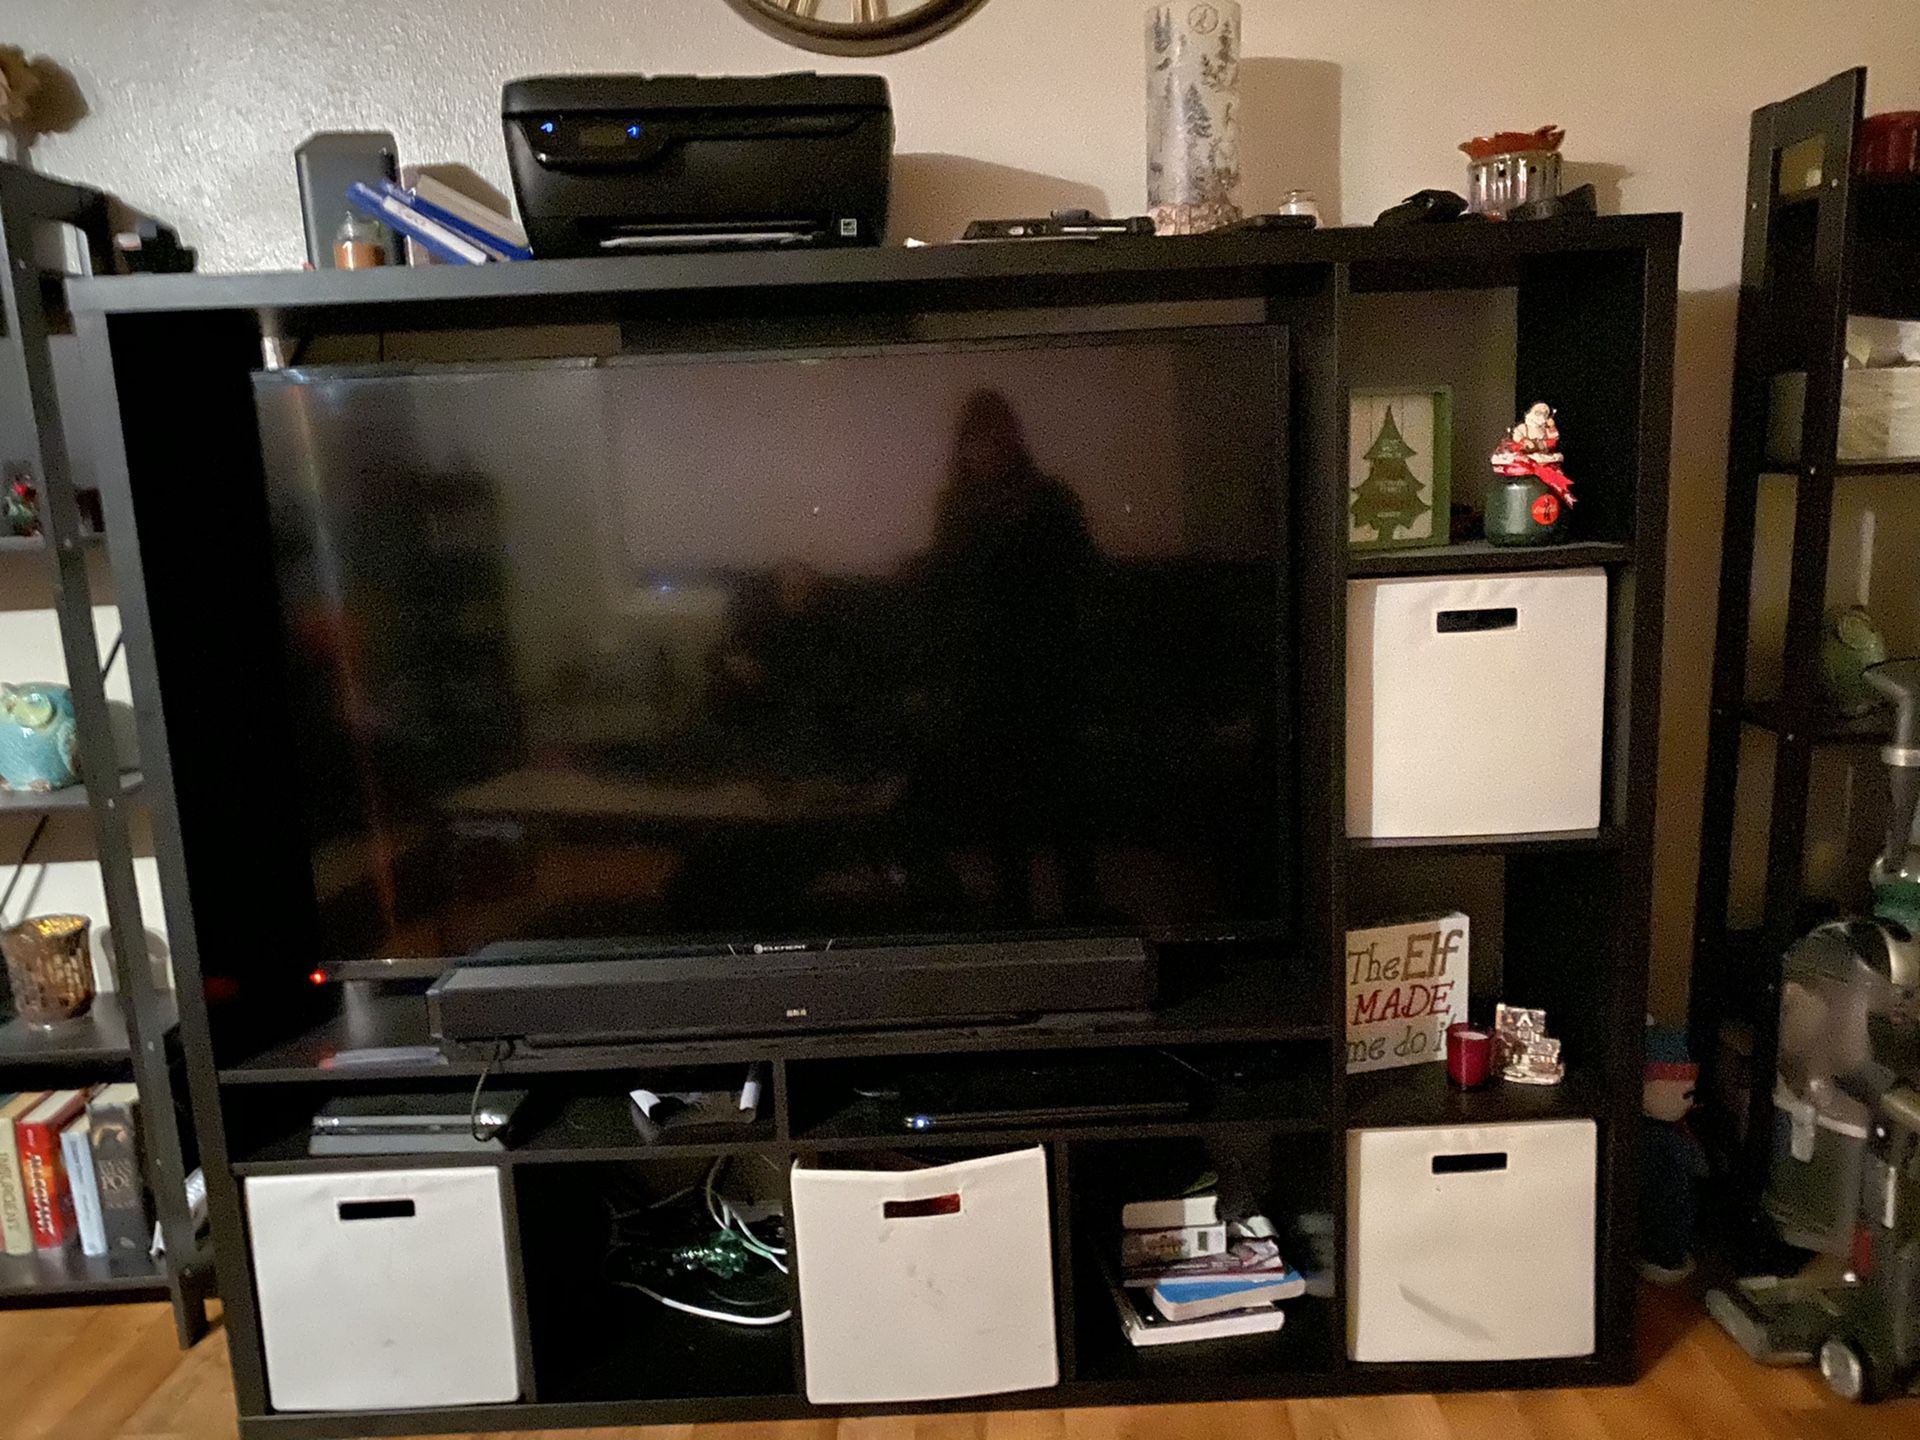 Tv and stand